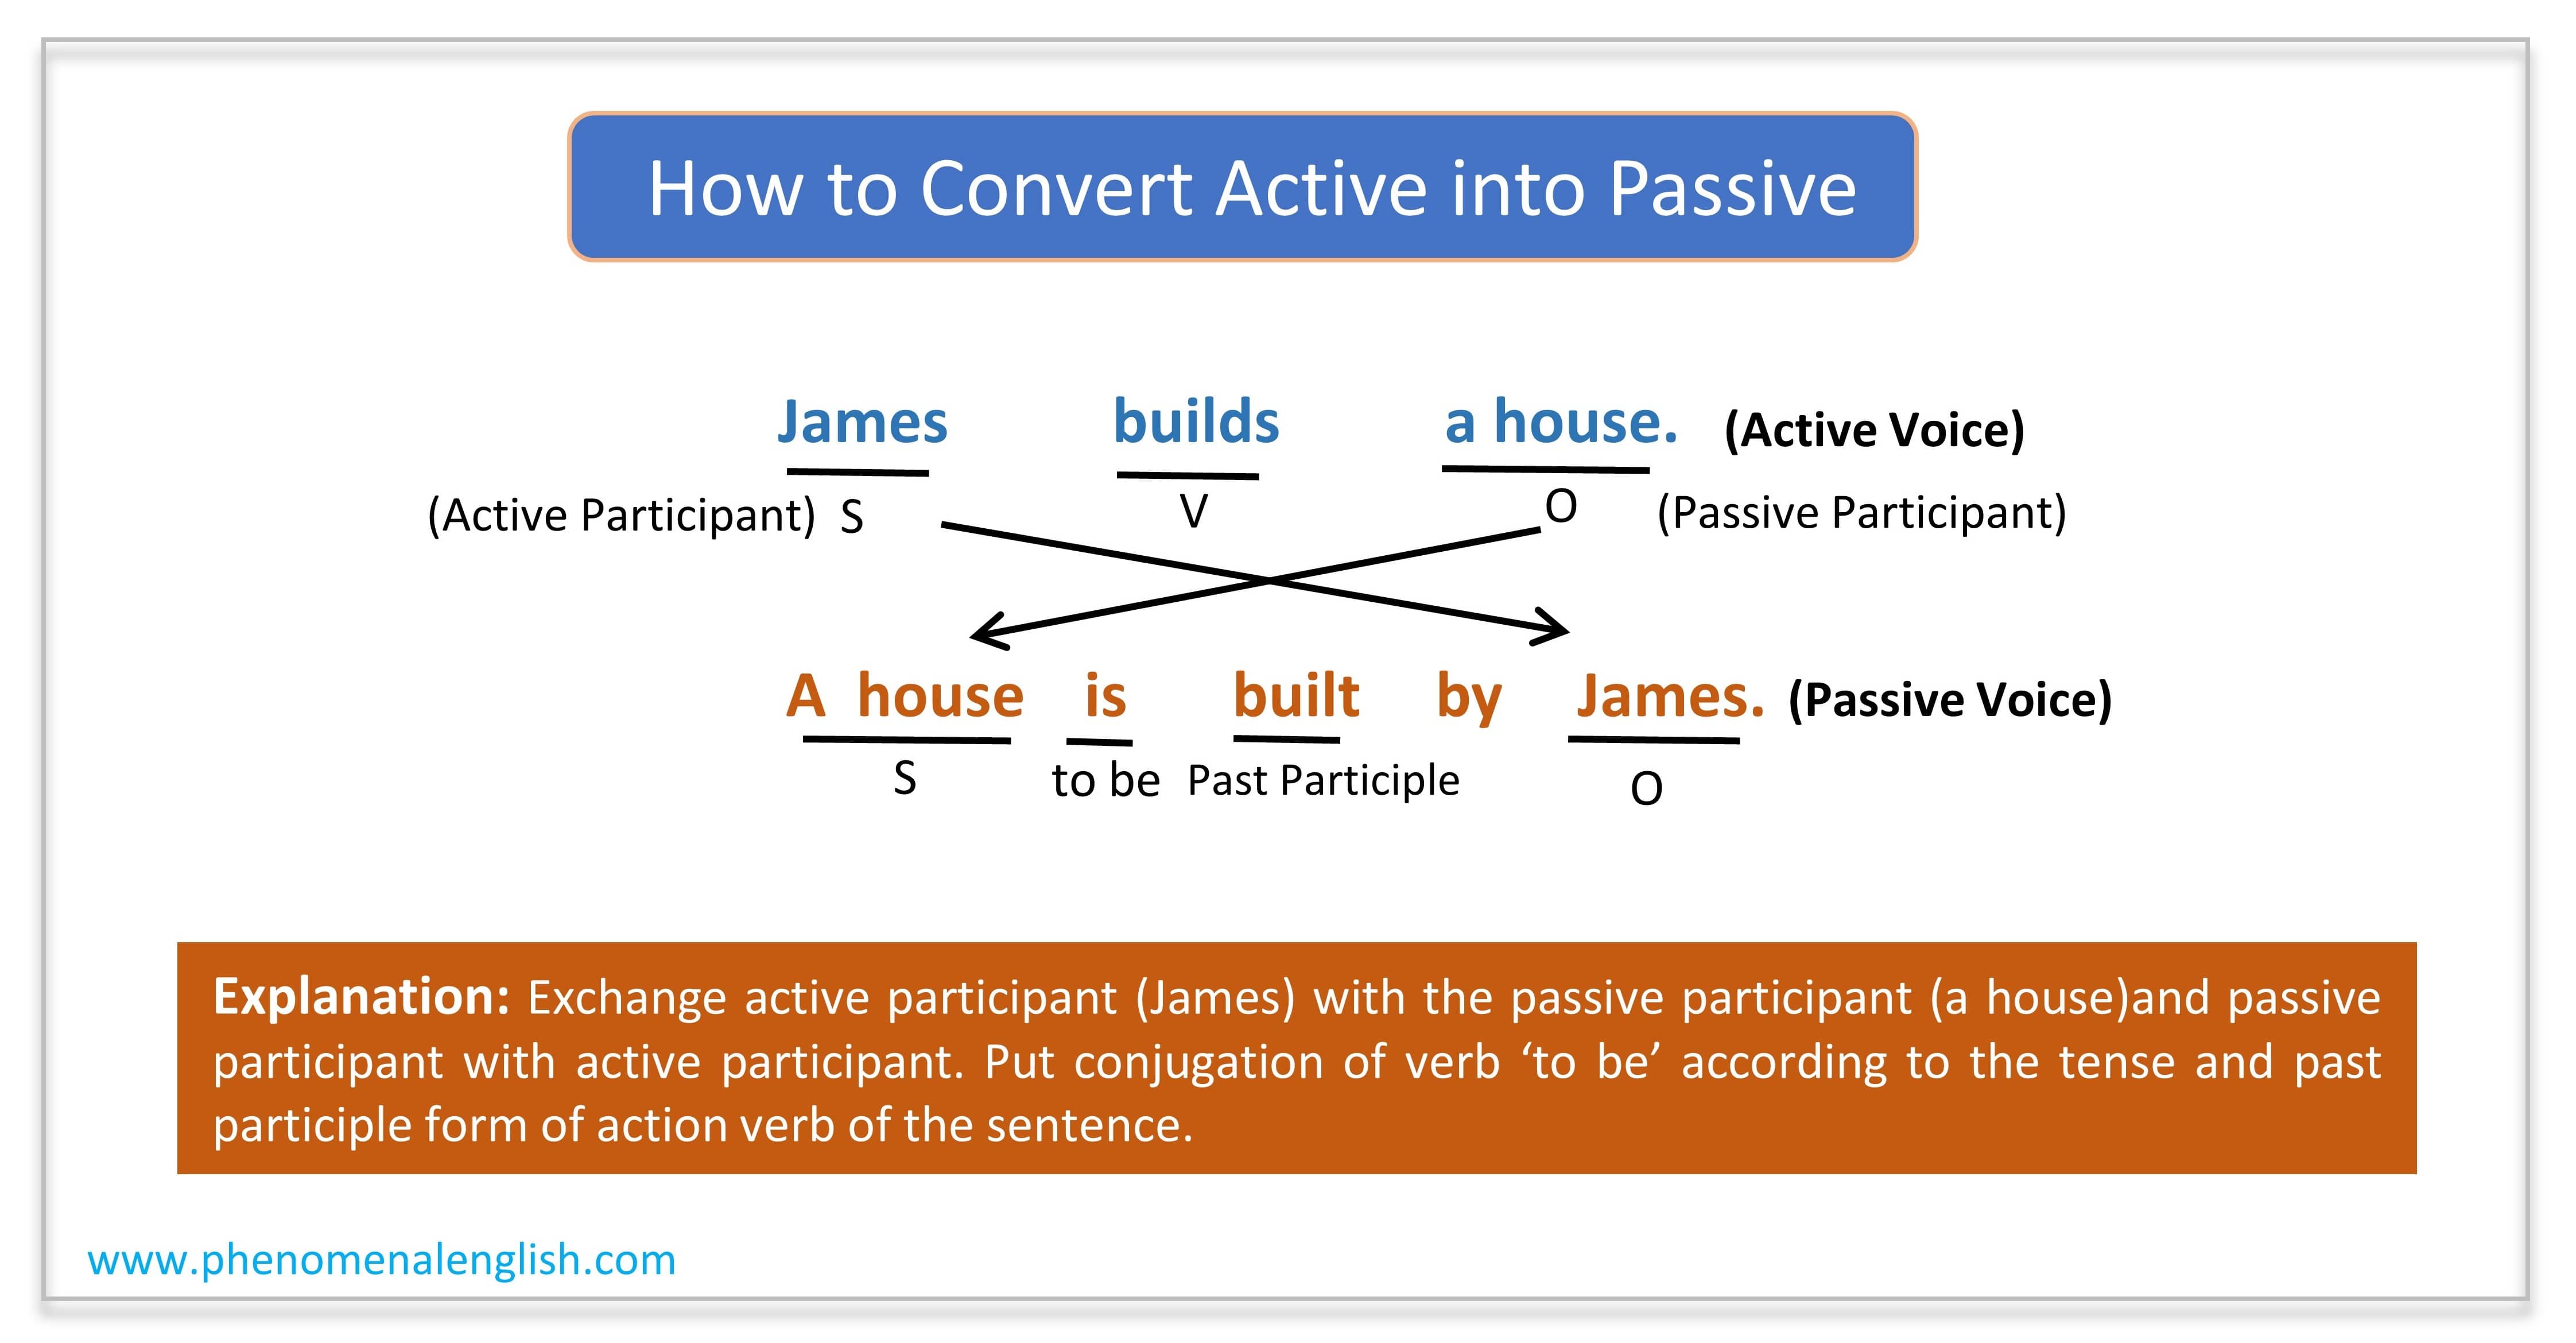 how to convert active into passive